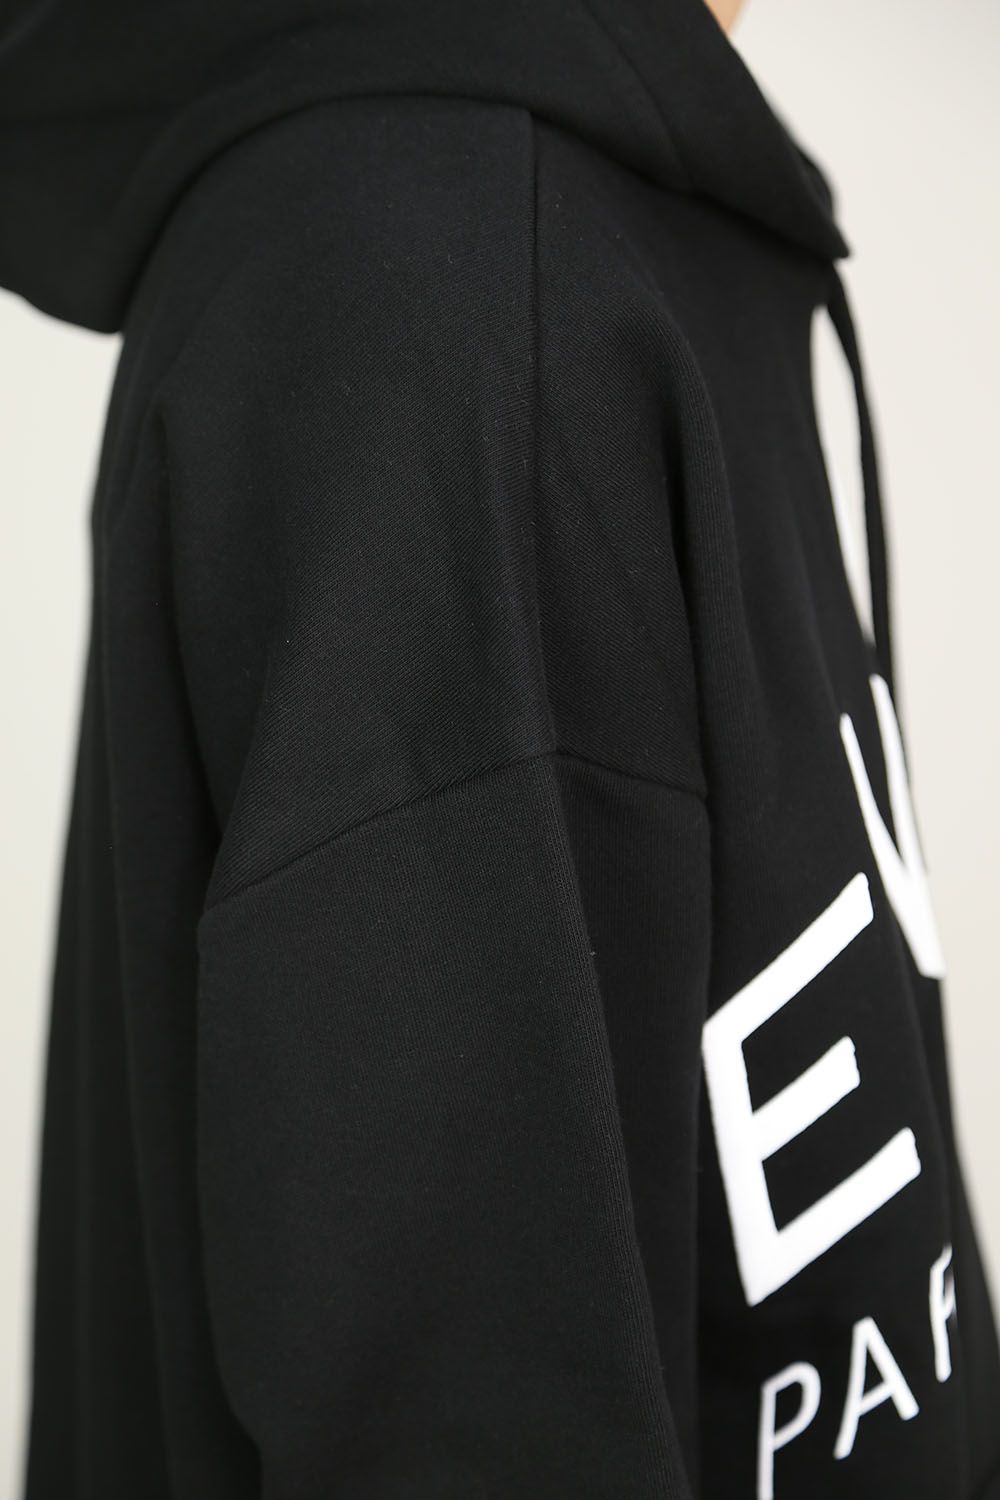 GIVENCHY - GIVENCHY LOGO HOODIE / ブラック | Tempt